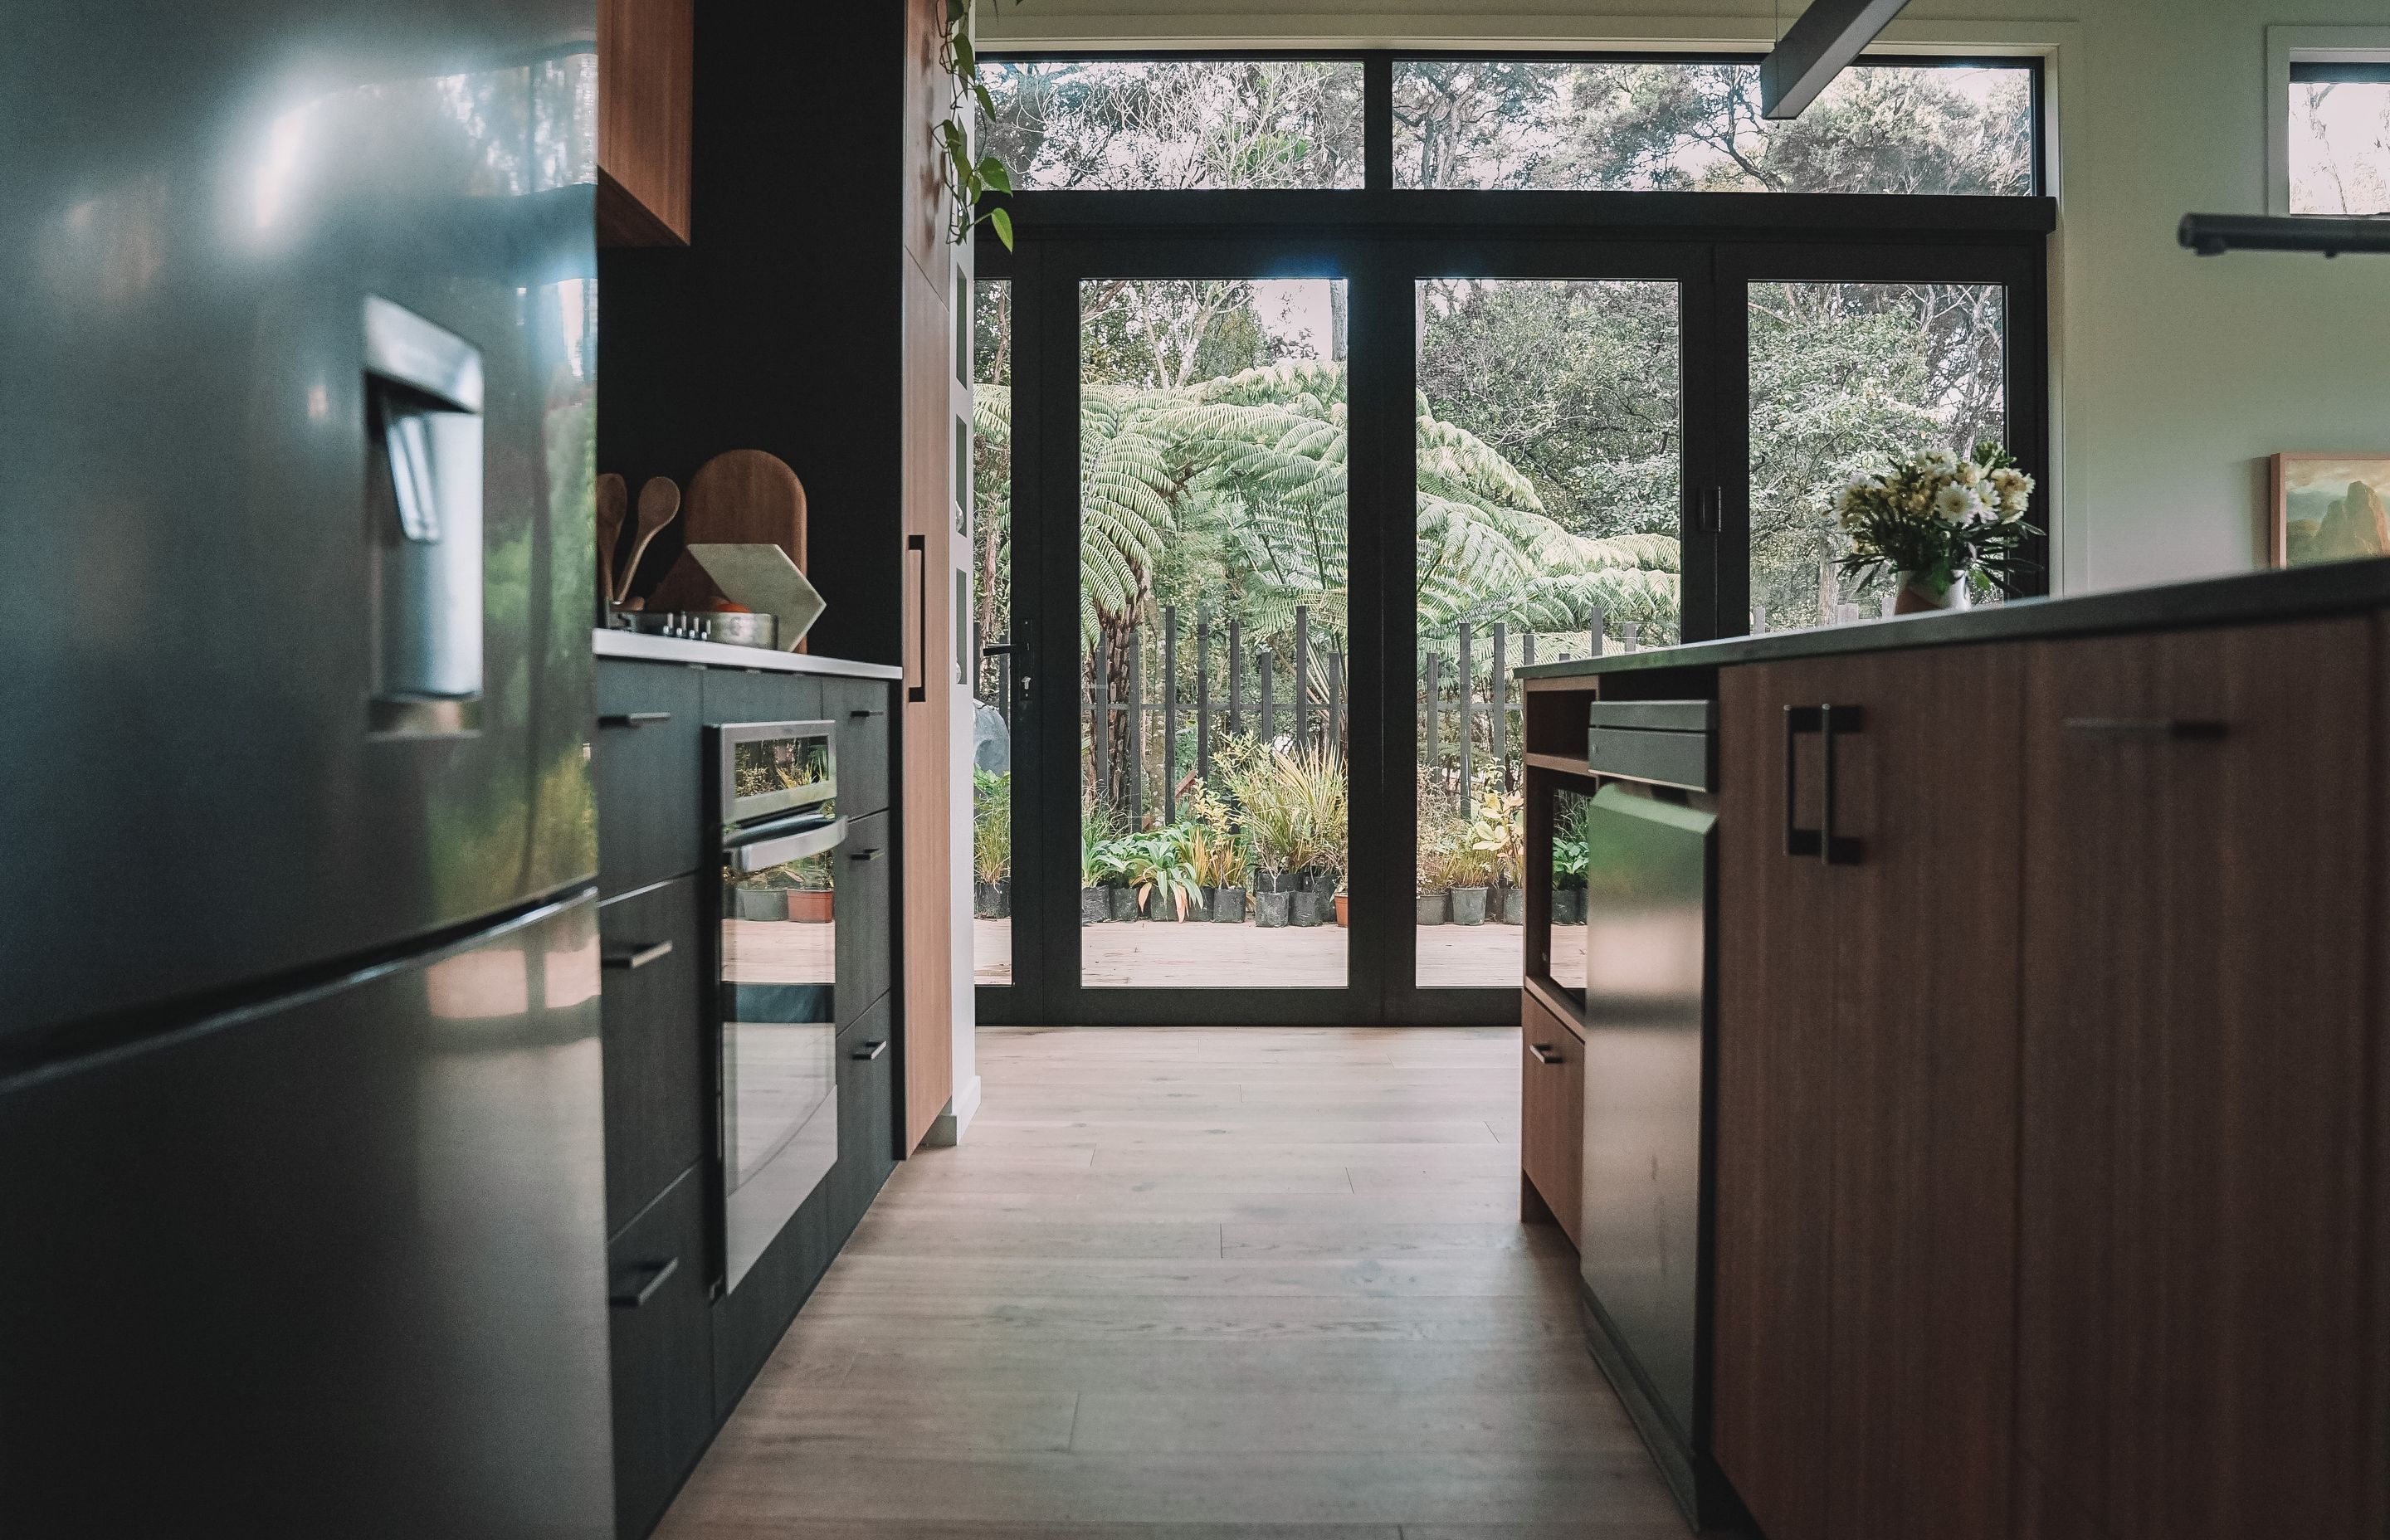 Black aluminium joinery was chosen for its low maintenance and synchronicity with the bush surroundings.